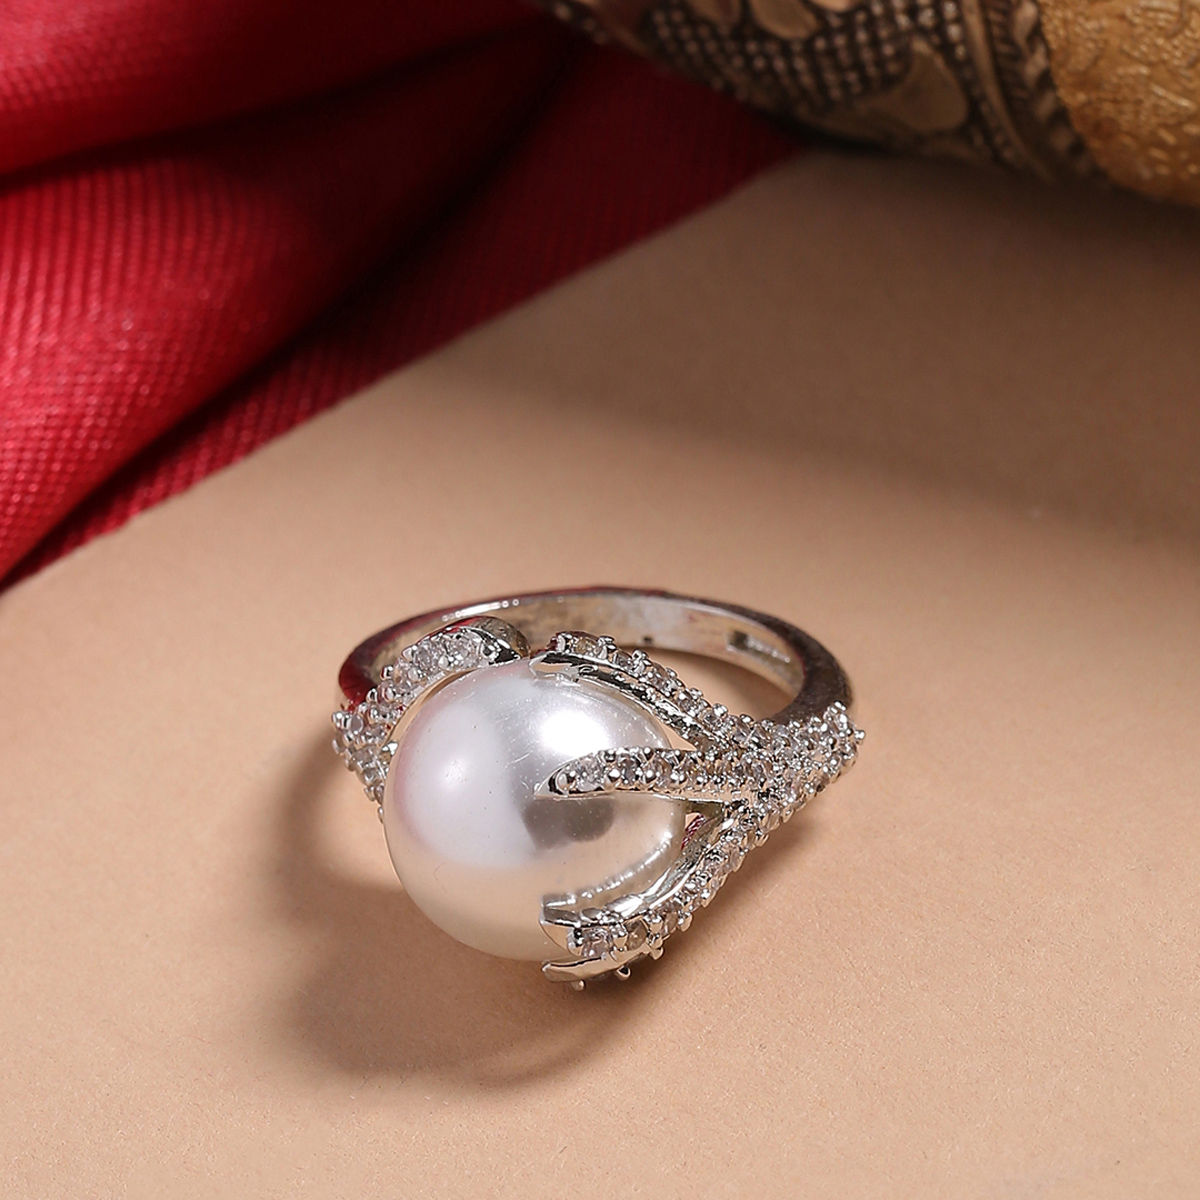 C And B Ring|women's Heart Mother Of Pearl Cocktail Ring Set - Adjustable  Gold Color Fashion Jewelry